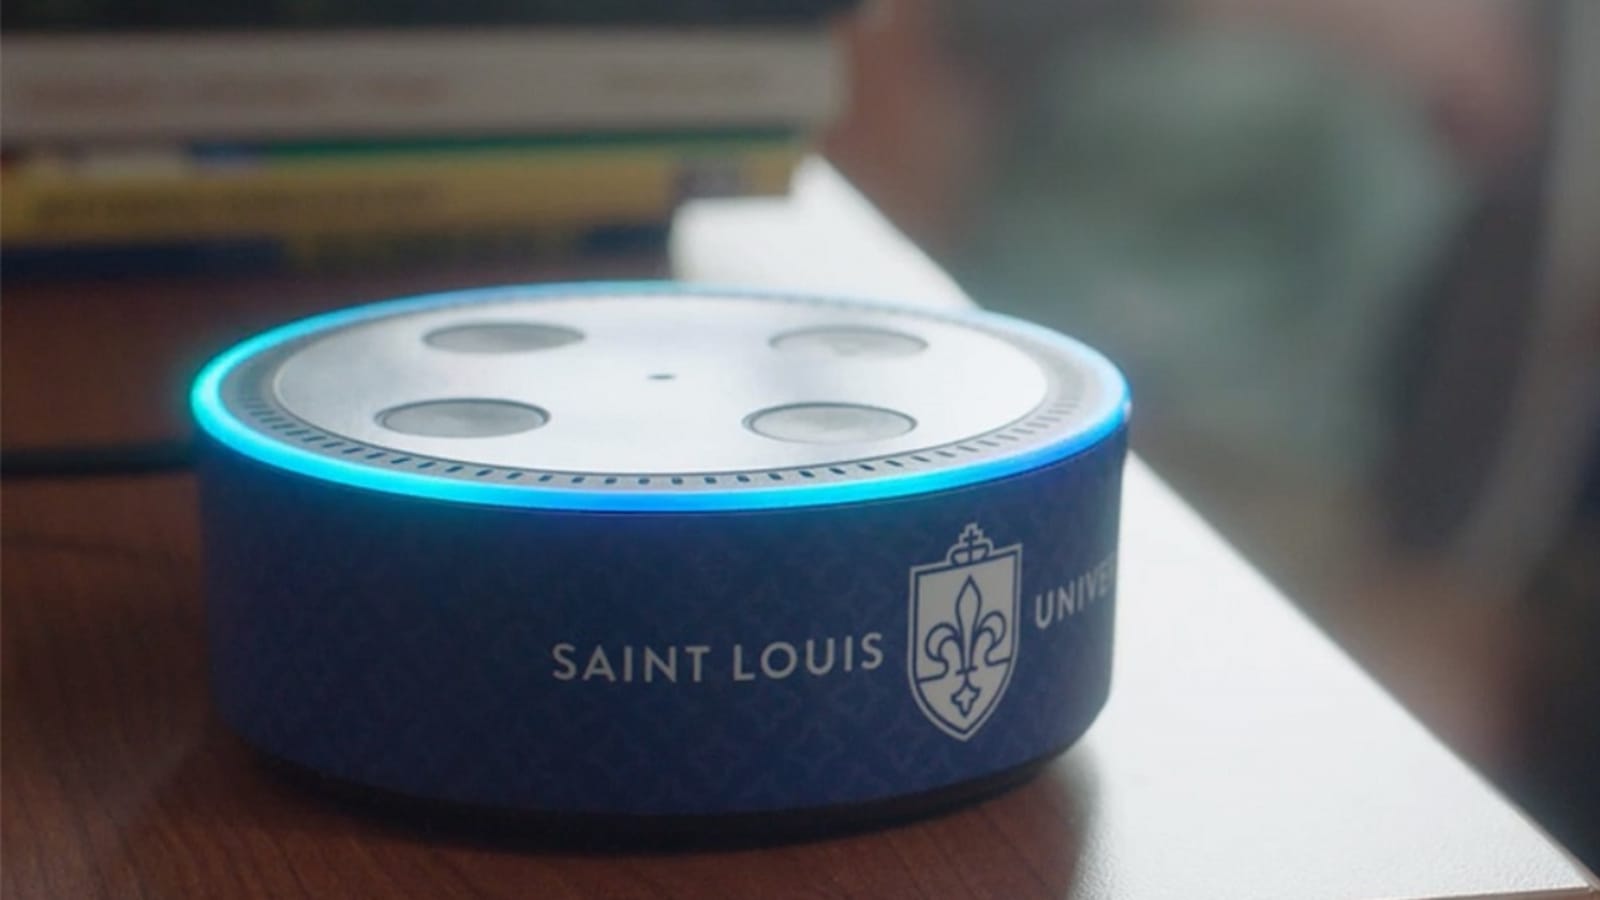 This university is putting  Echo speakers in every dorm room